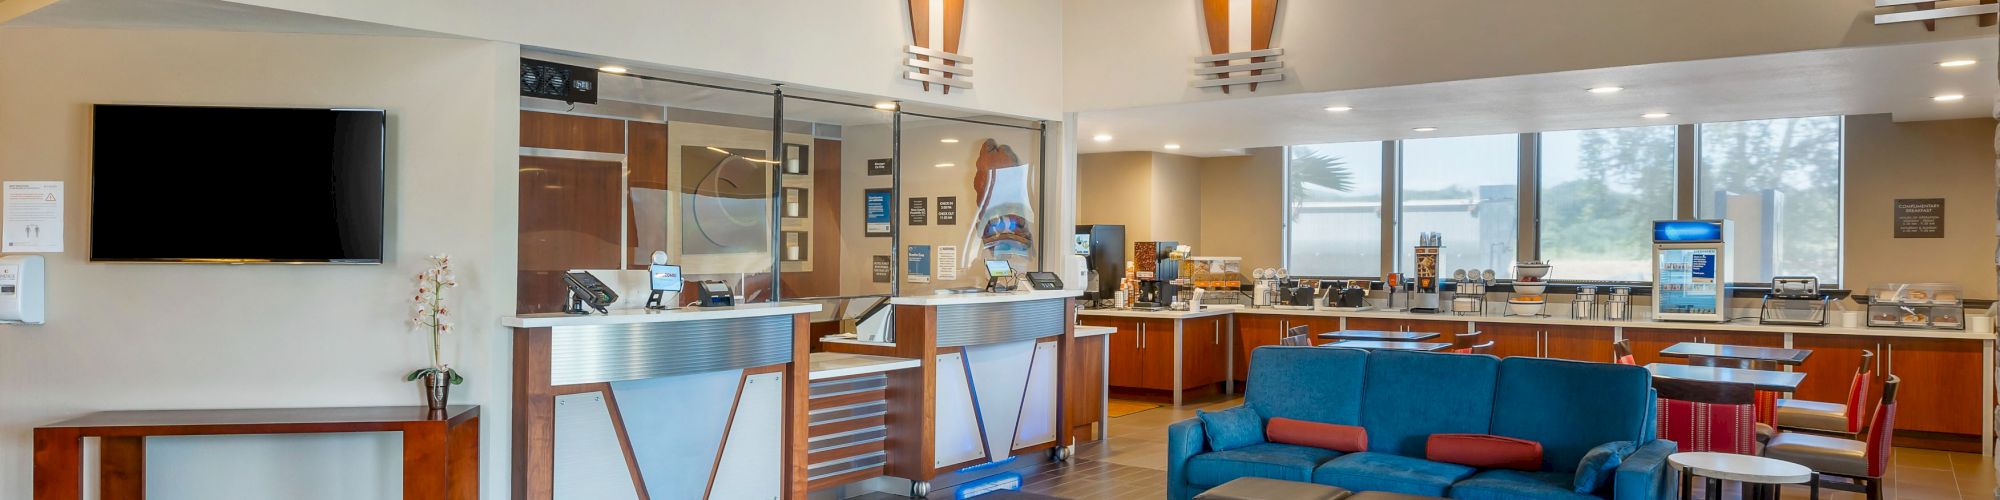 The image shows a modern lobby area with a reception desk, seating, a TV, and a breakfast bar. The space features contemporary decor and ample lighting.